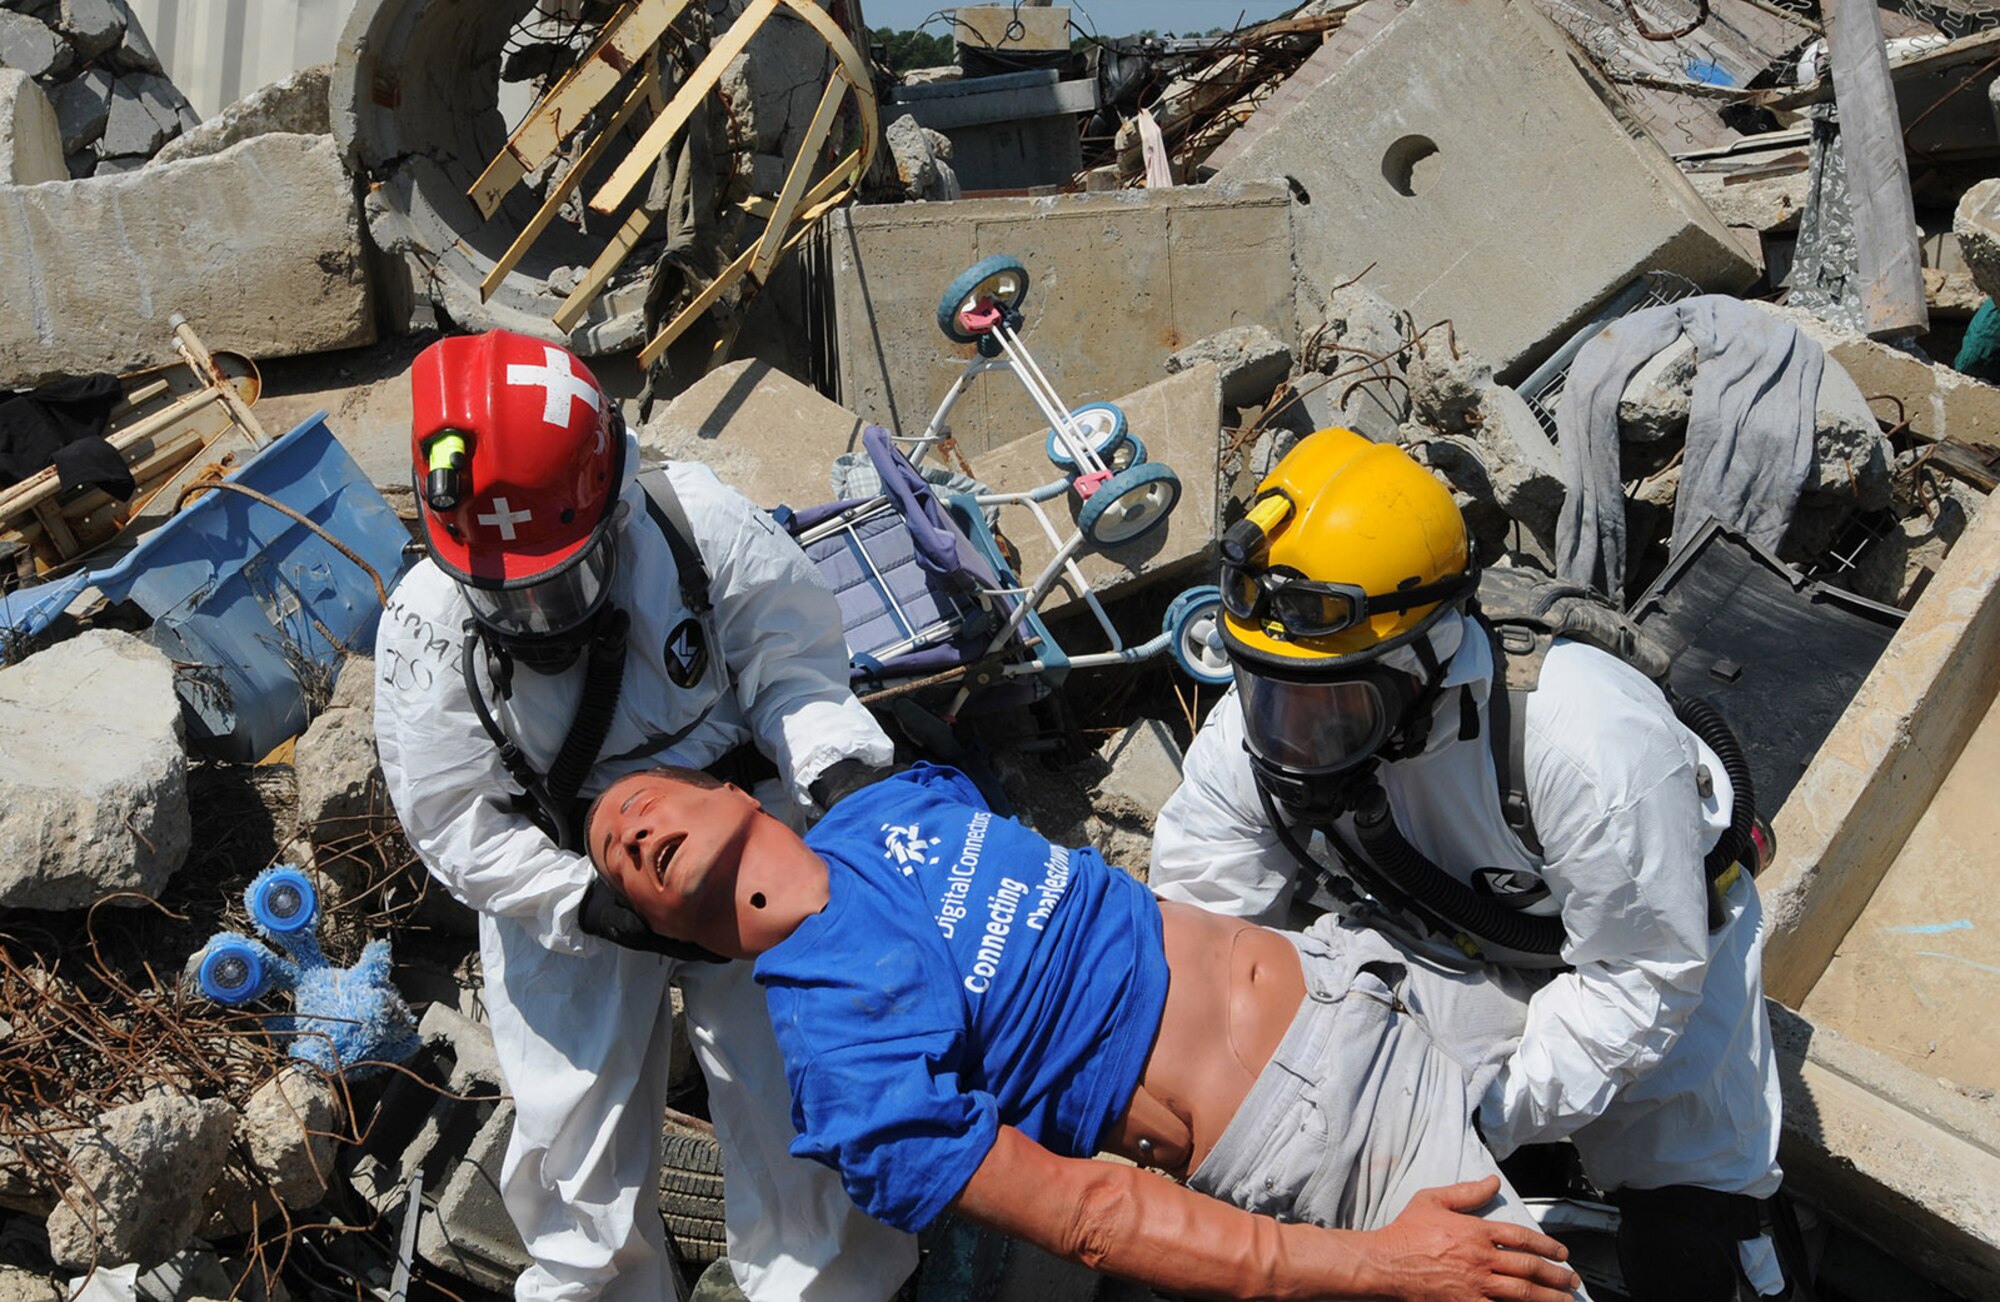 Joint search and extraction team members pull a simulated victim from the rubble at the Muscatatuck Urban Training Center at Camp Atterbury, Ind., July 27, 2012, during exercise Vibrant Response 13. Vibrant Response is a U.S. Northern Command-sponsored field training exercise for chemical, biological, radiological, nuclear and high-yield explosive consequence management forces designed to improve their ability to respond to catastrophic incidents. (U.S. Army photo by Staff Sgt. Keith Anderson)